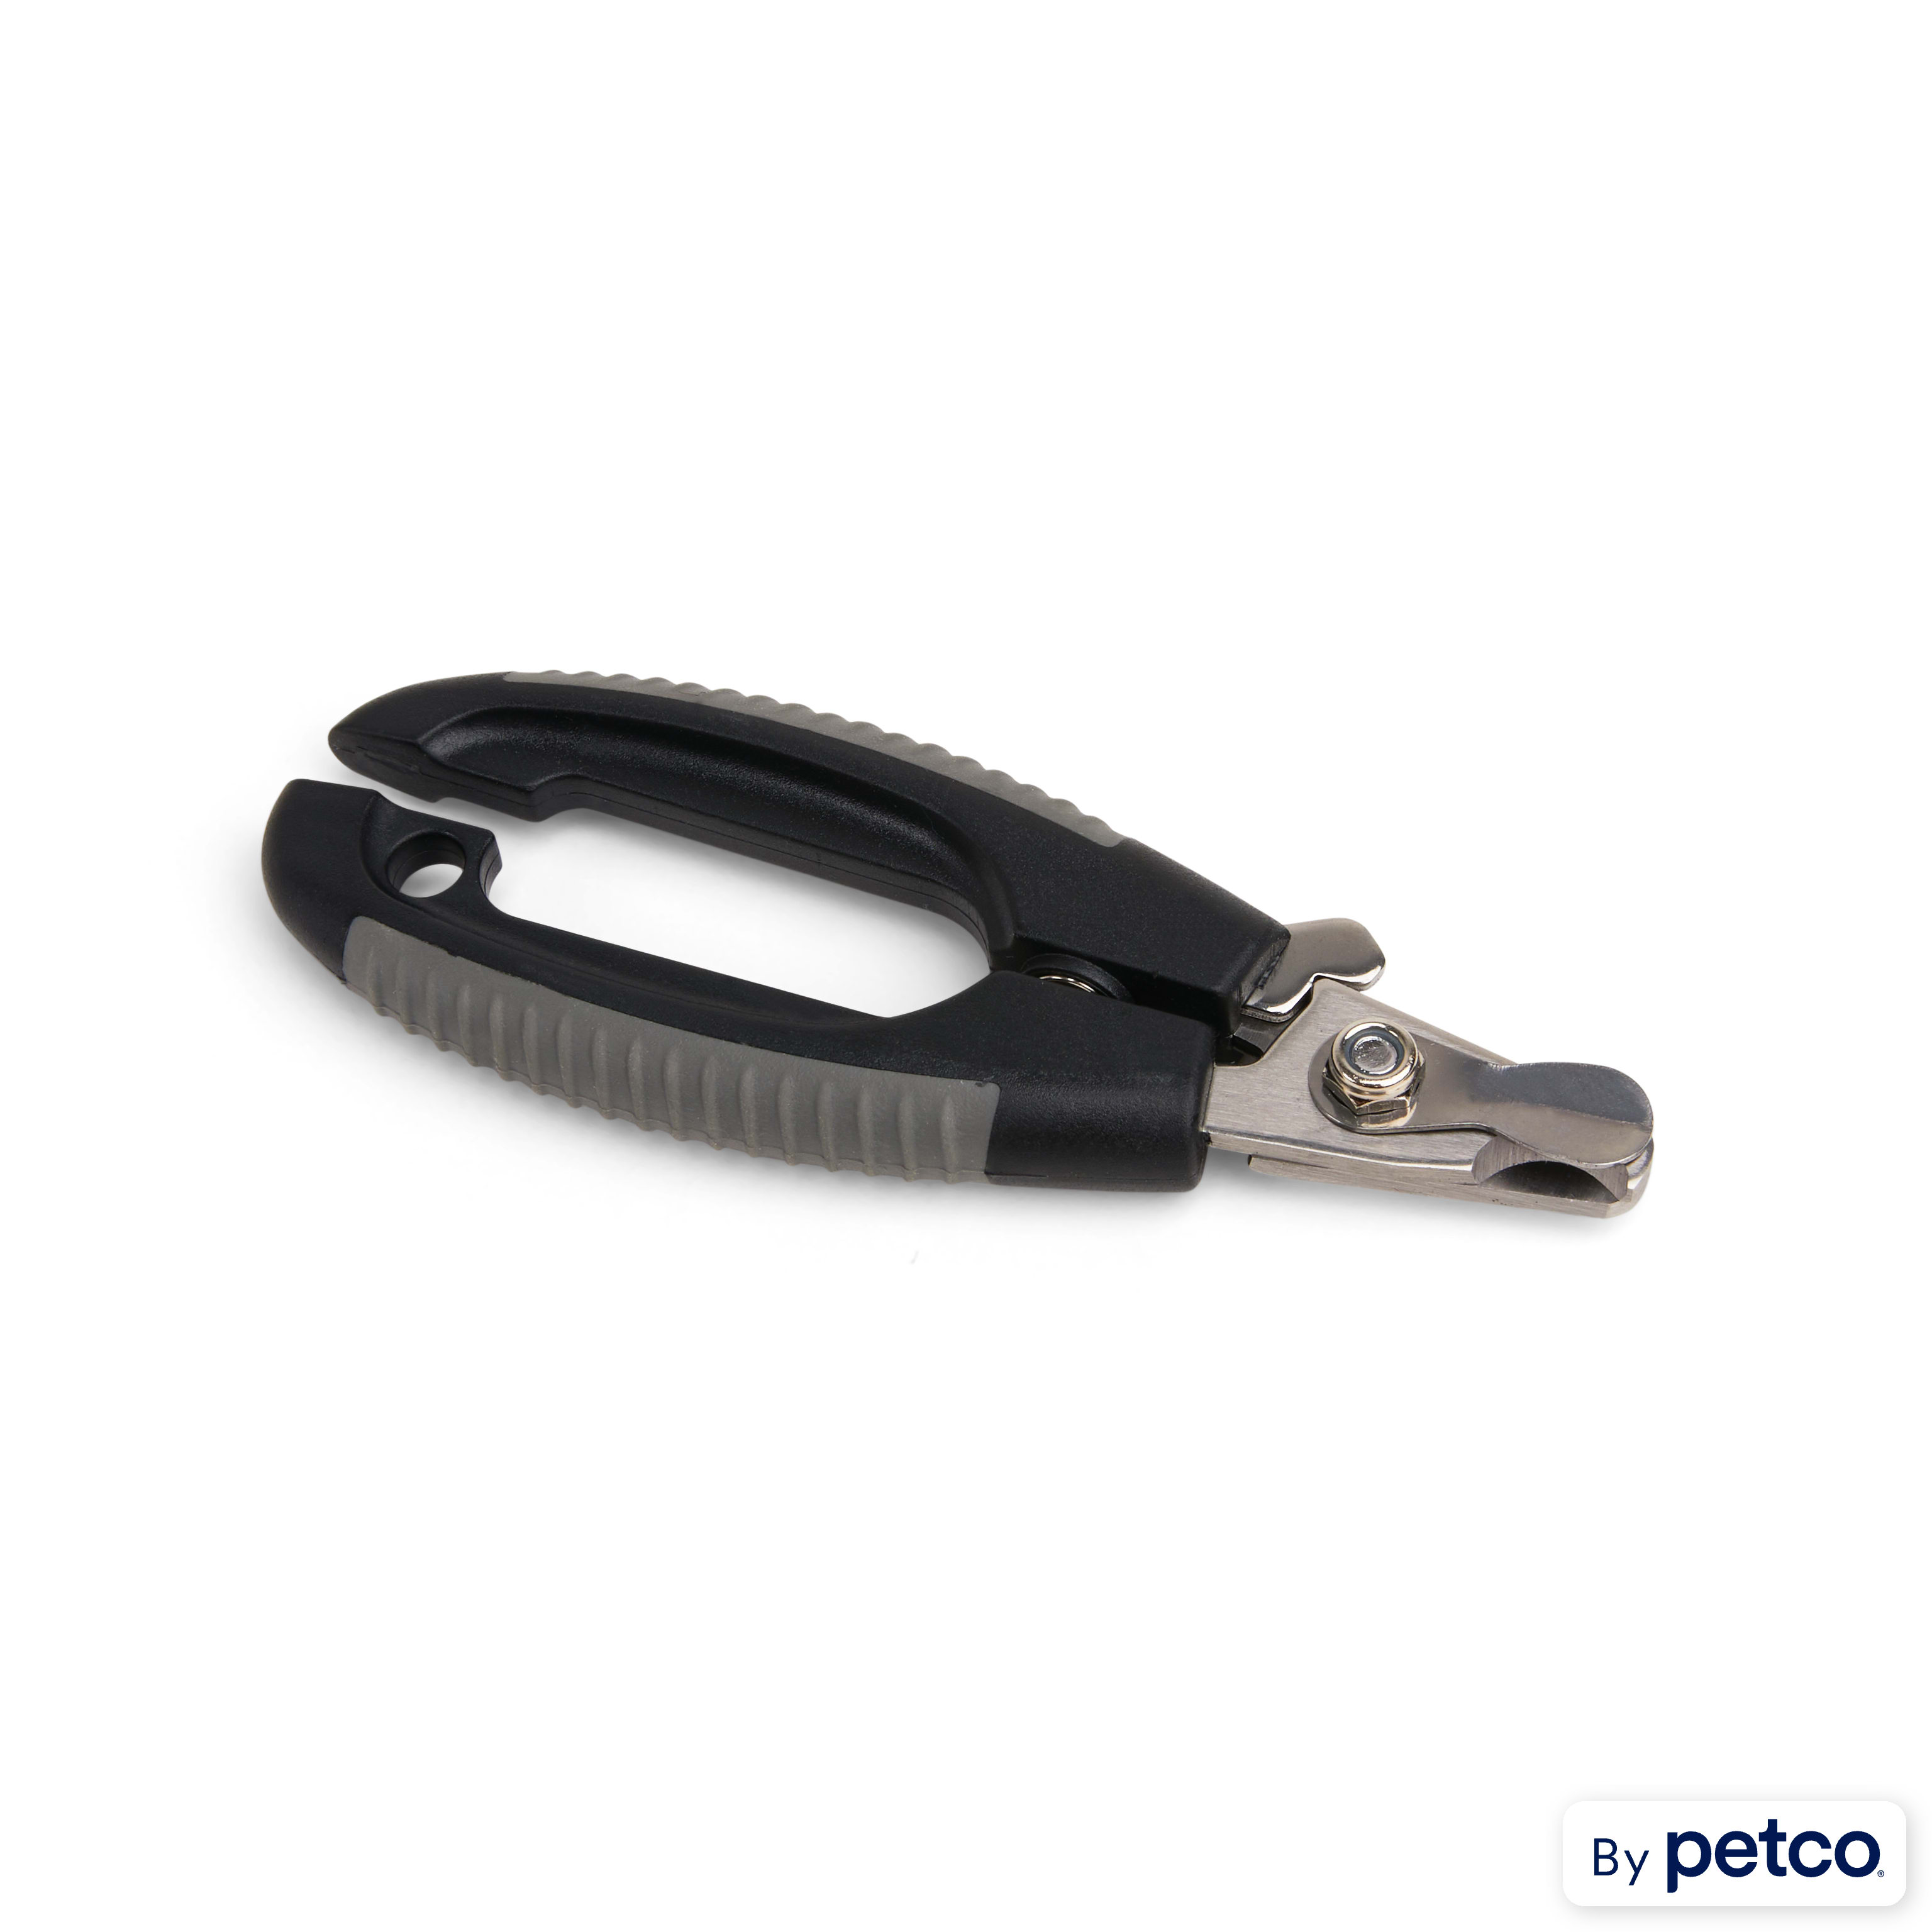 Wellco Pet Nail Clipper- Great for Trimming Cats and Dogs Nails and Claws, All-in-One Grooming Kit